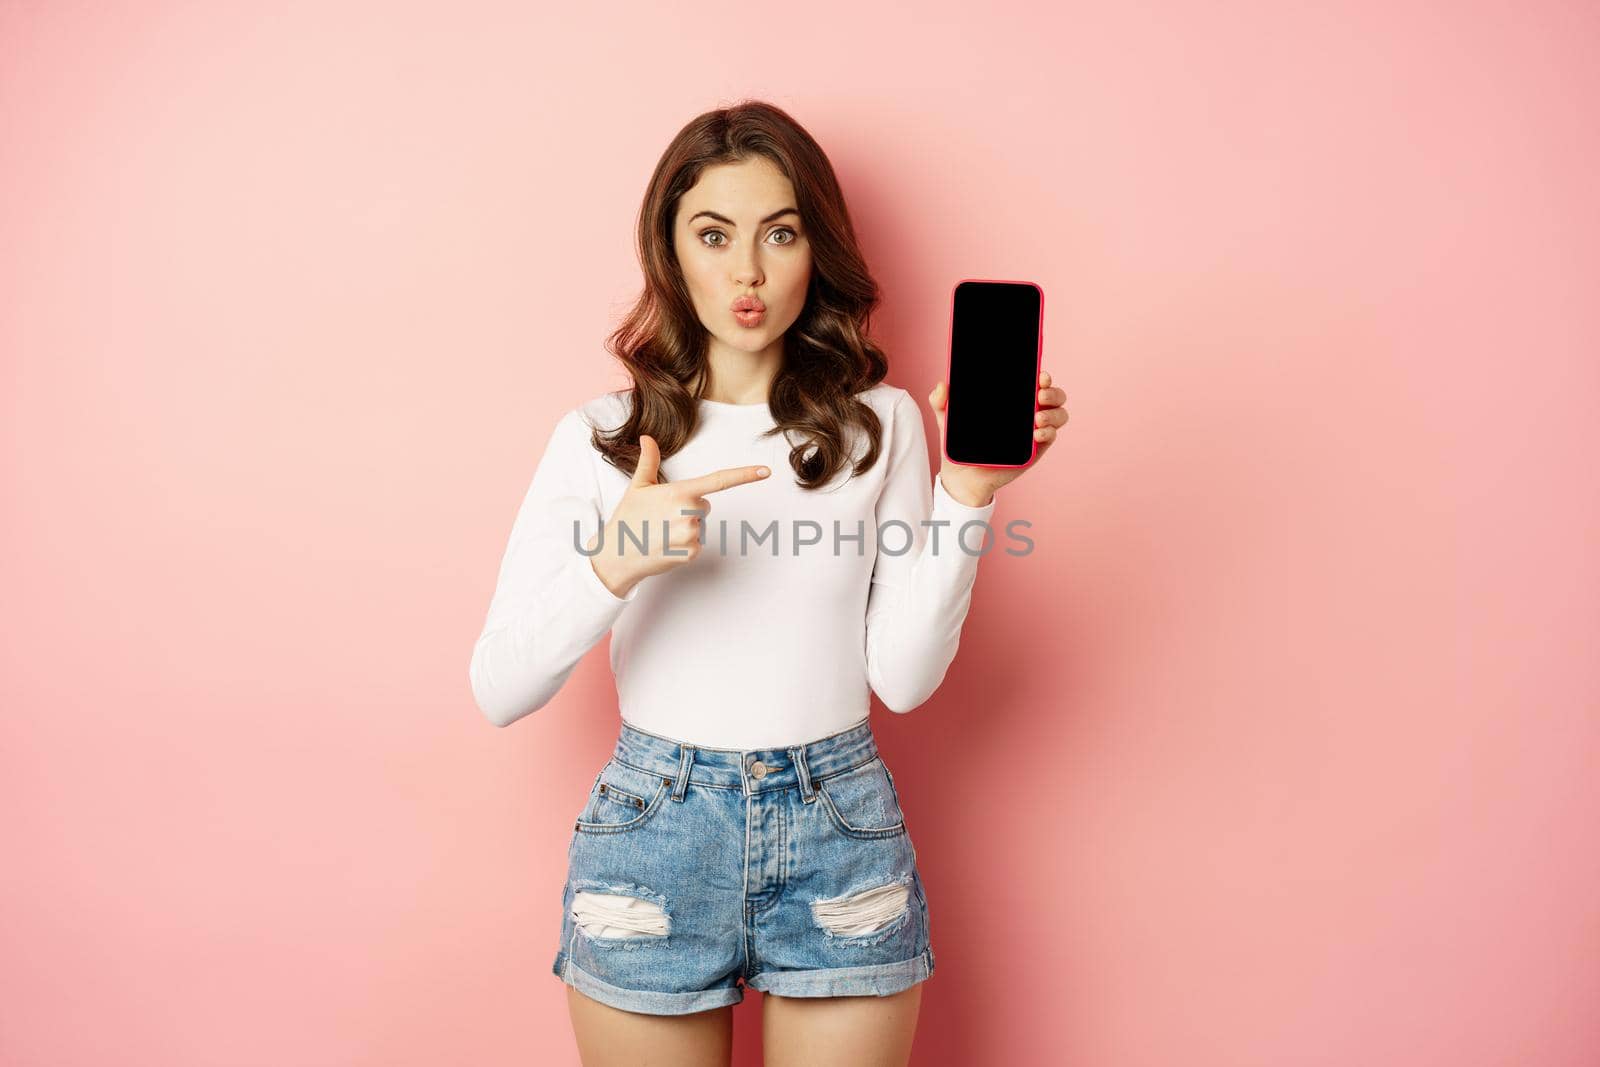 Surprised brunette girl pointing at mobile phone app screen, showing smartphone advertisement, online shopping offer, standing amazed against pink background.